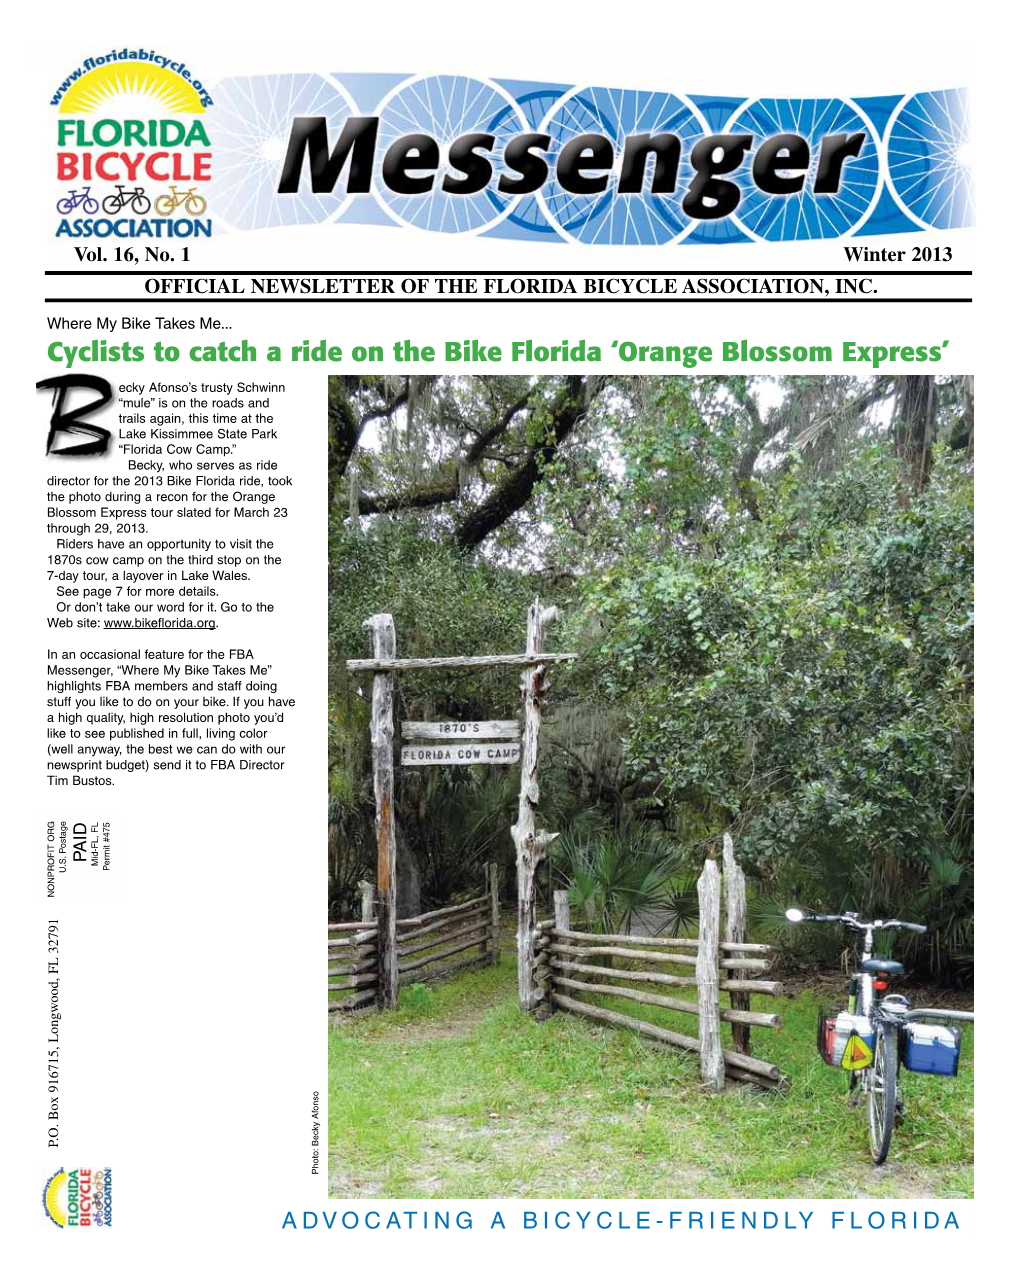 Cyclists to Catch a Ride on the Bike Florida ‘Orange Blossom Express’